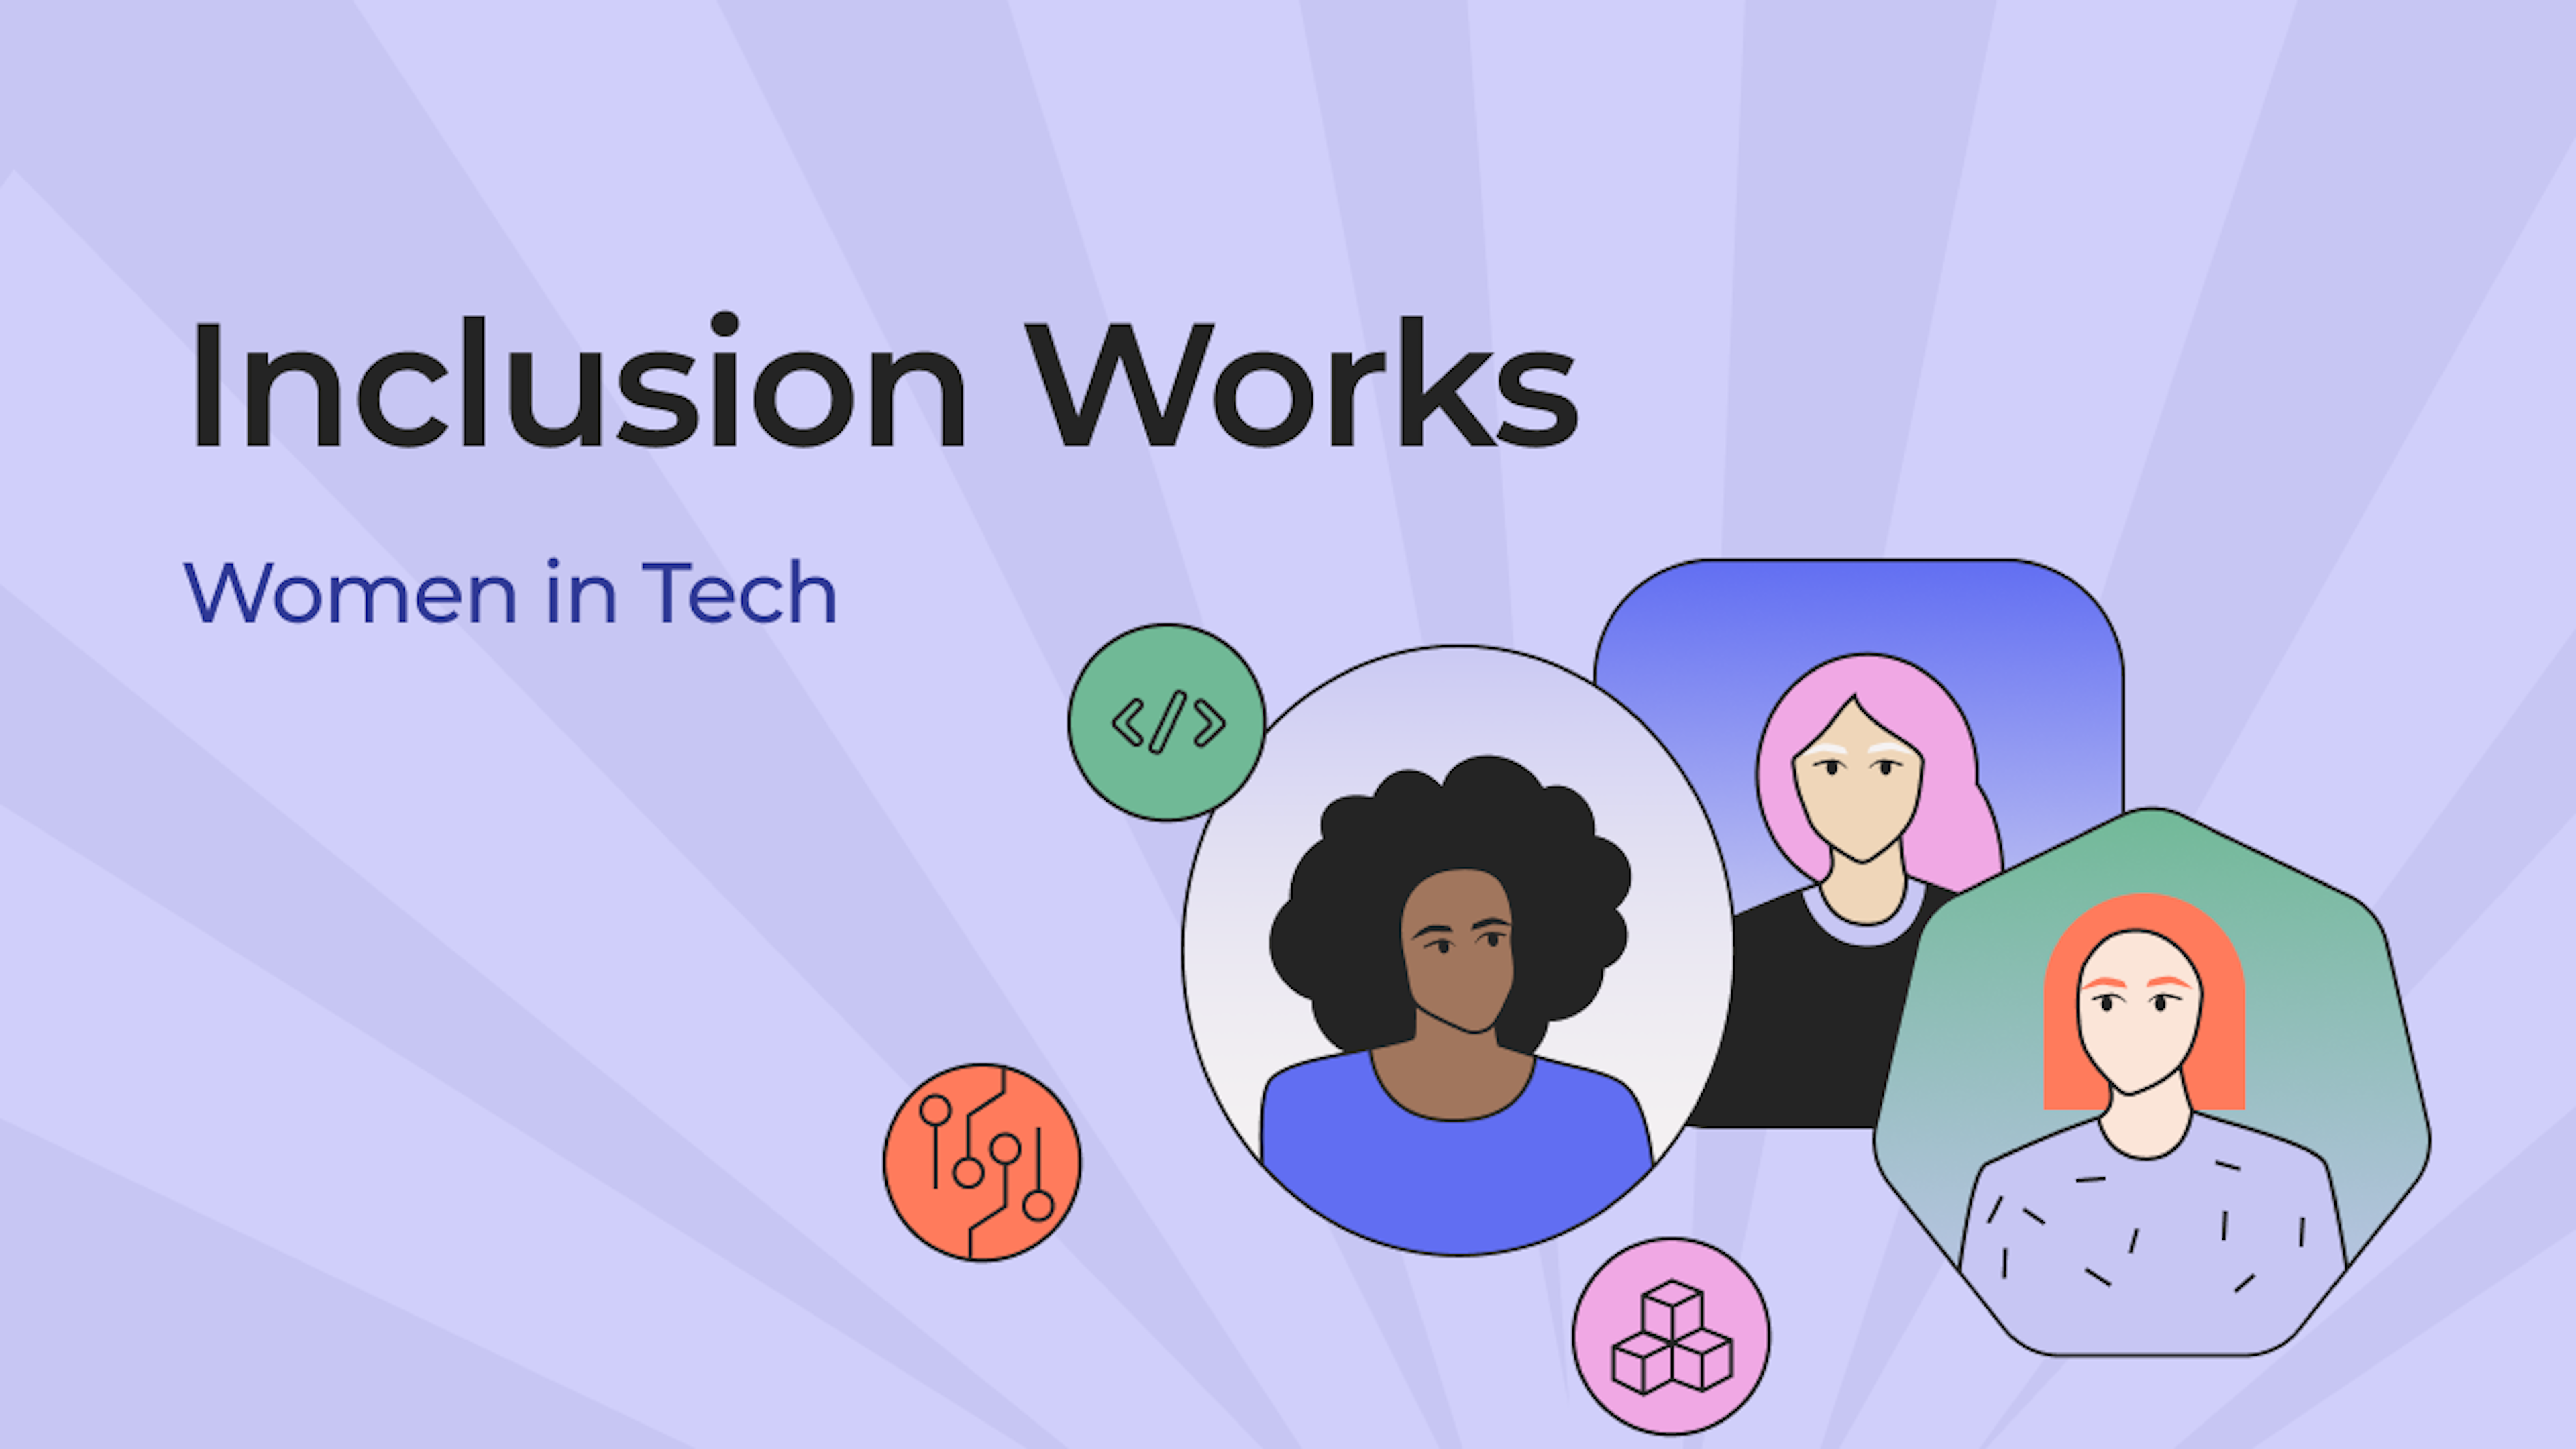 Inclusion Works: Women in Tech - Challenges, Diversity and New Beginnings